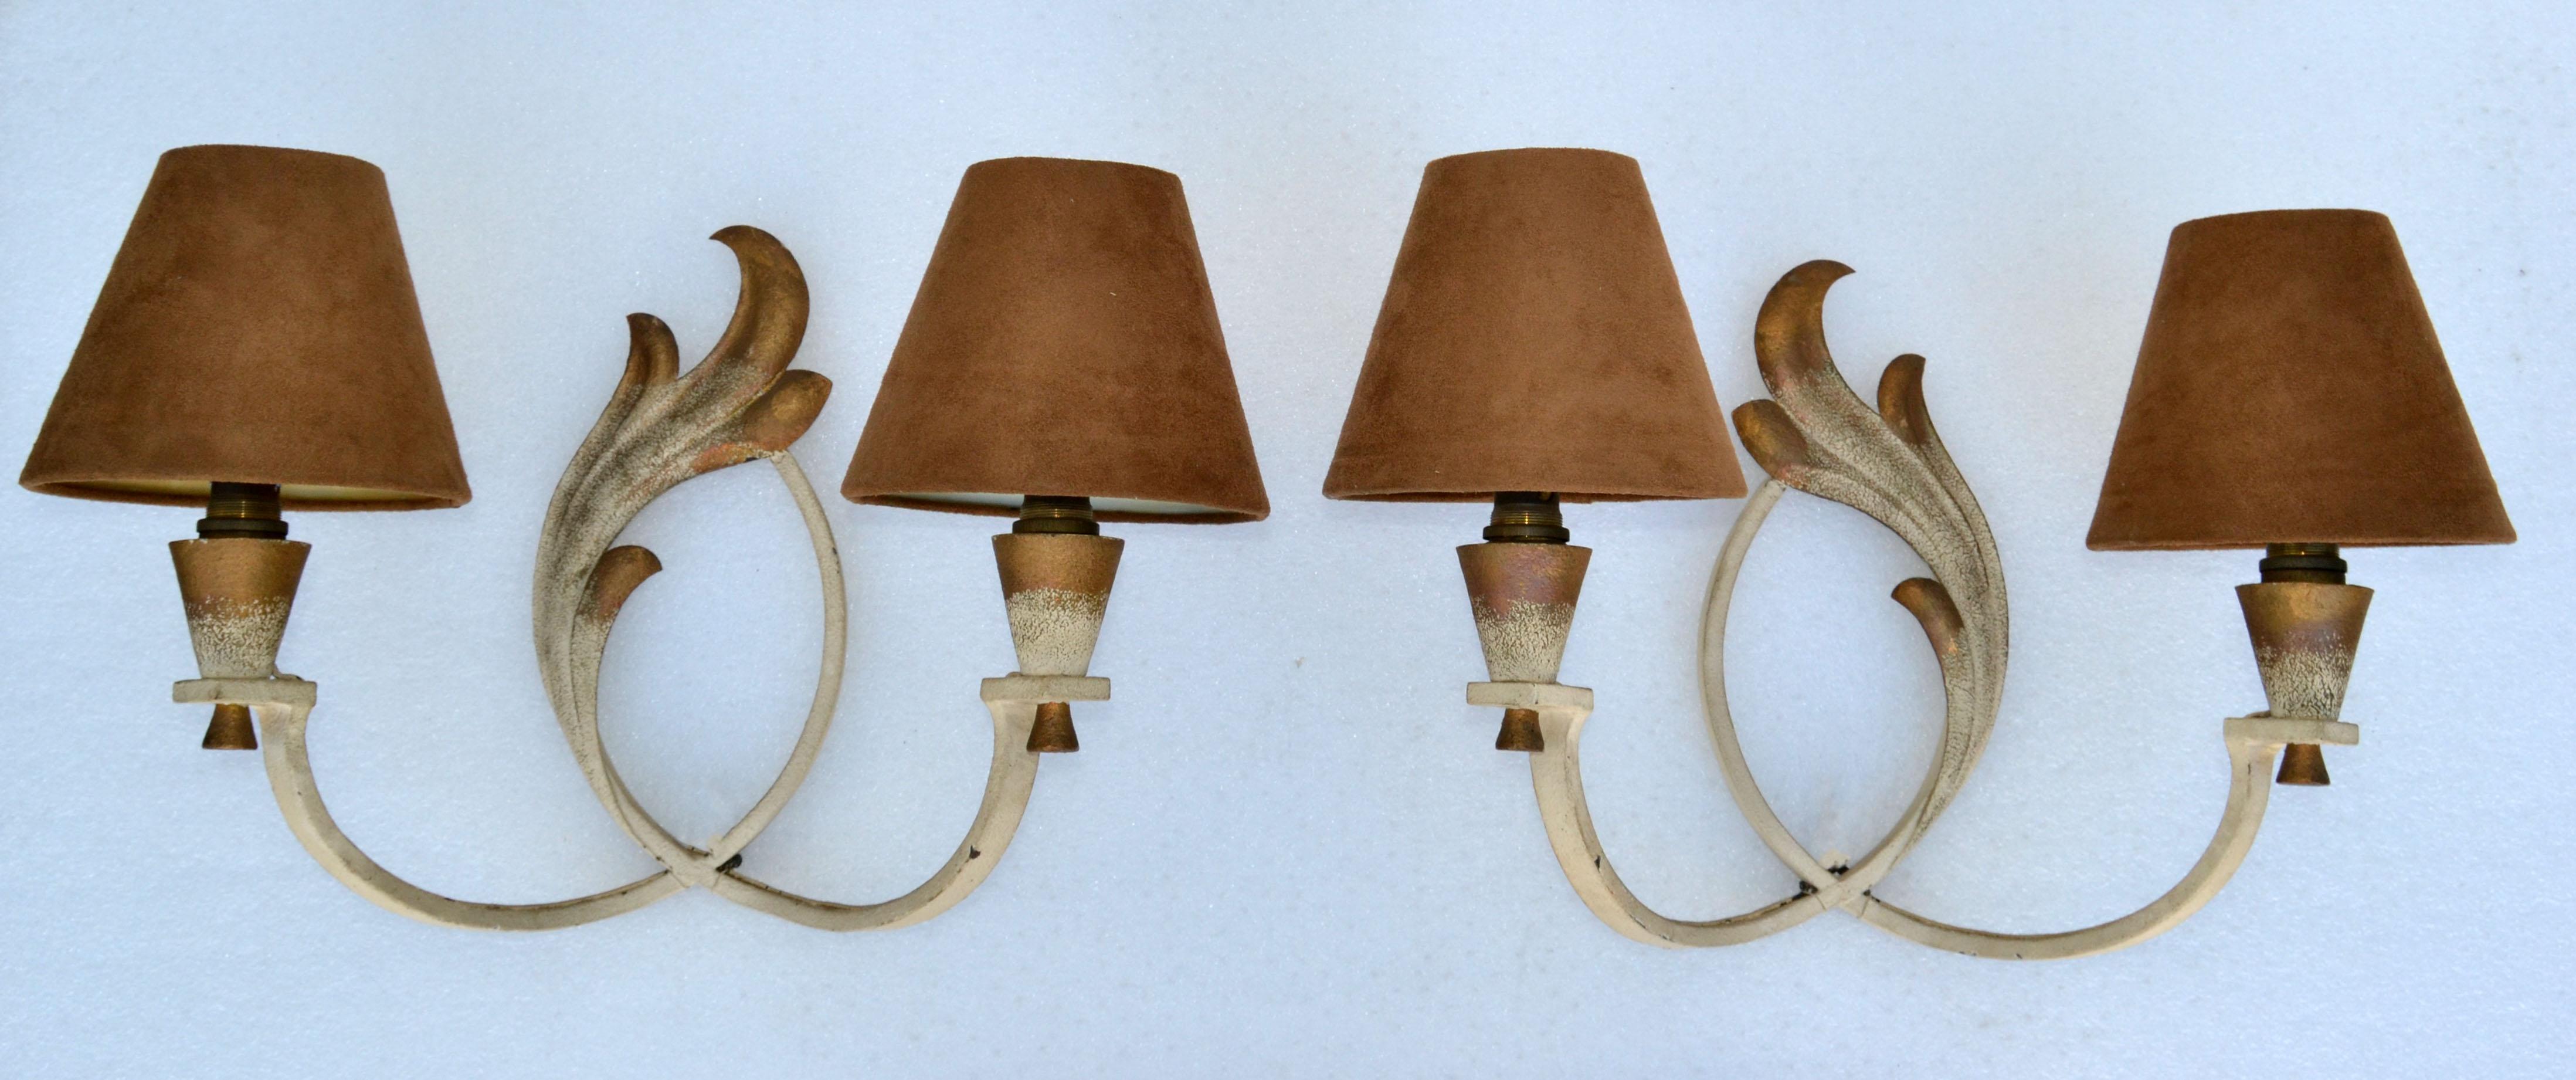 French Wrought Iron Sconces & Shades, Wall Lights Art Deco 1950 For Sale 7